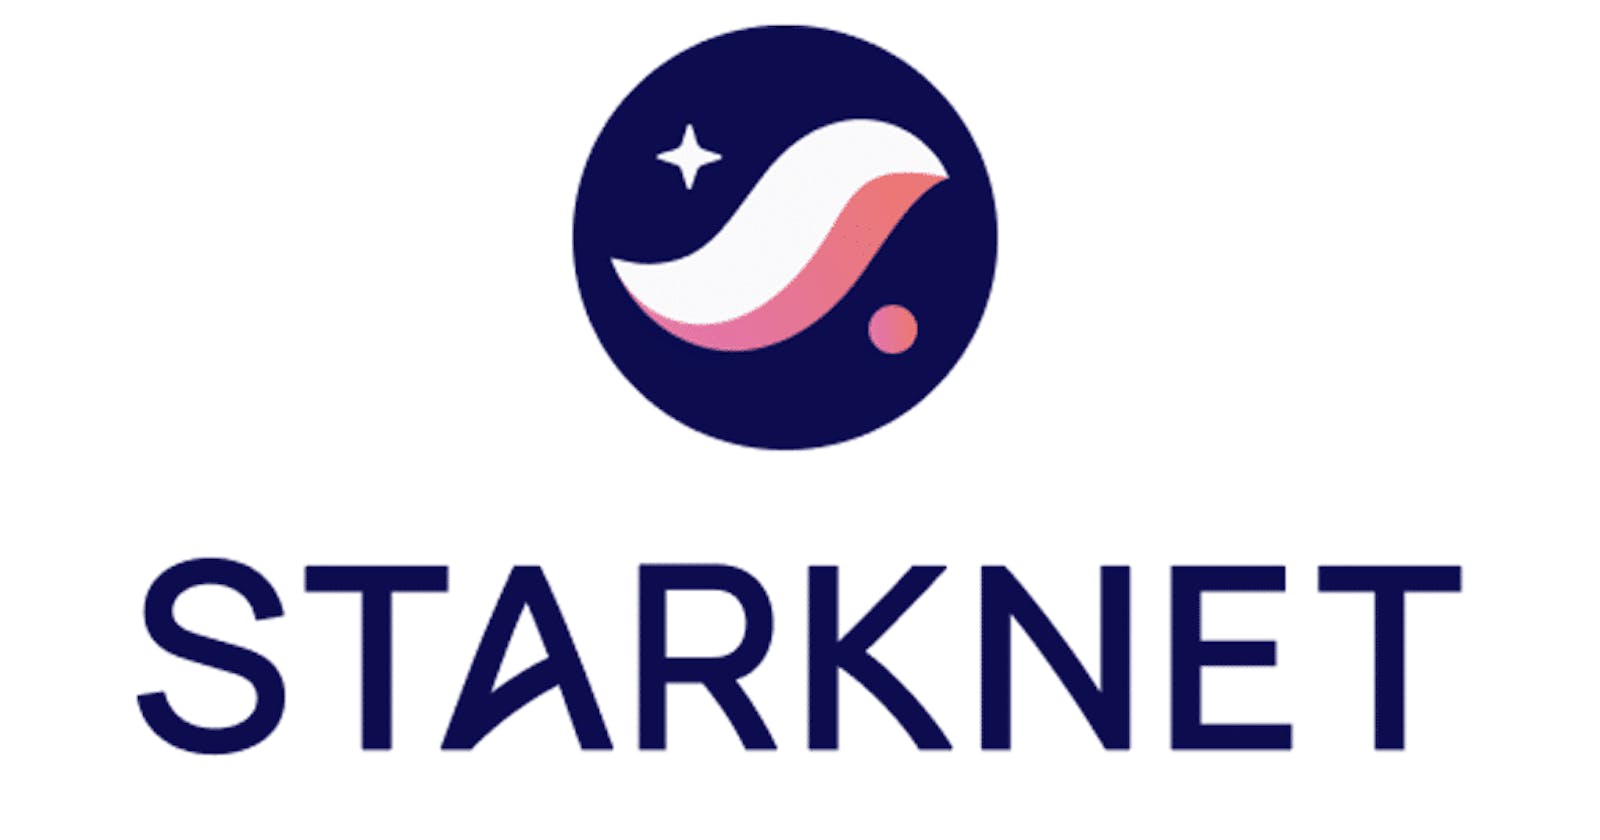 Exploring the Difference Between Starknet Programs and Contracts